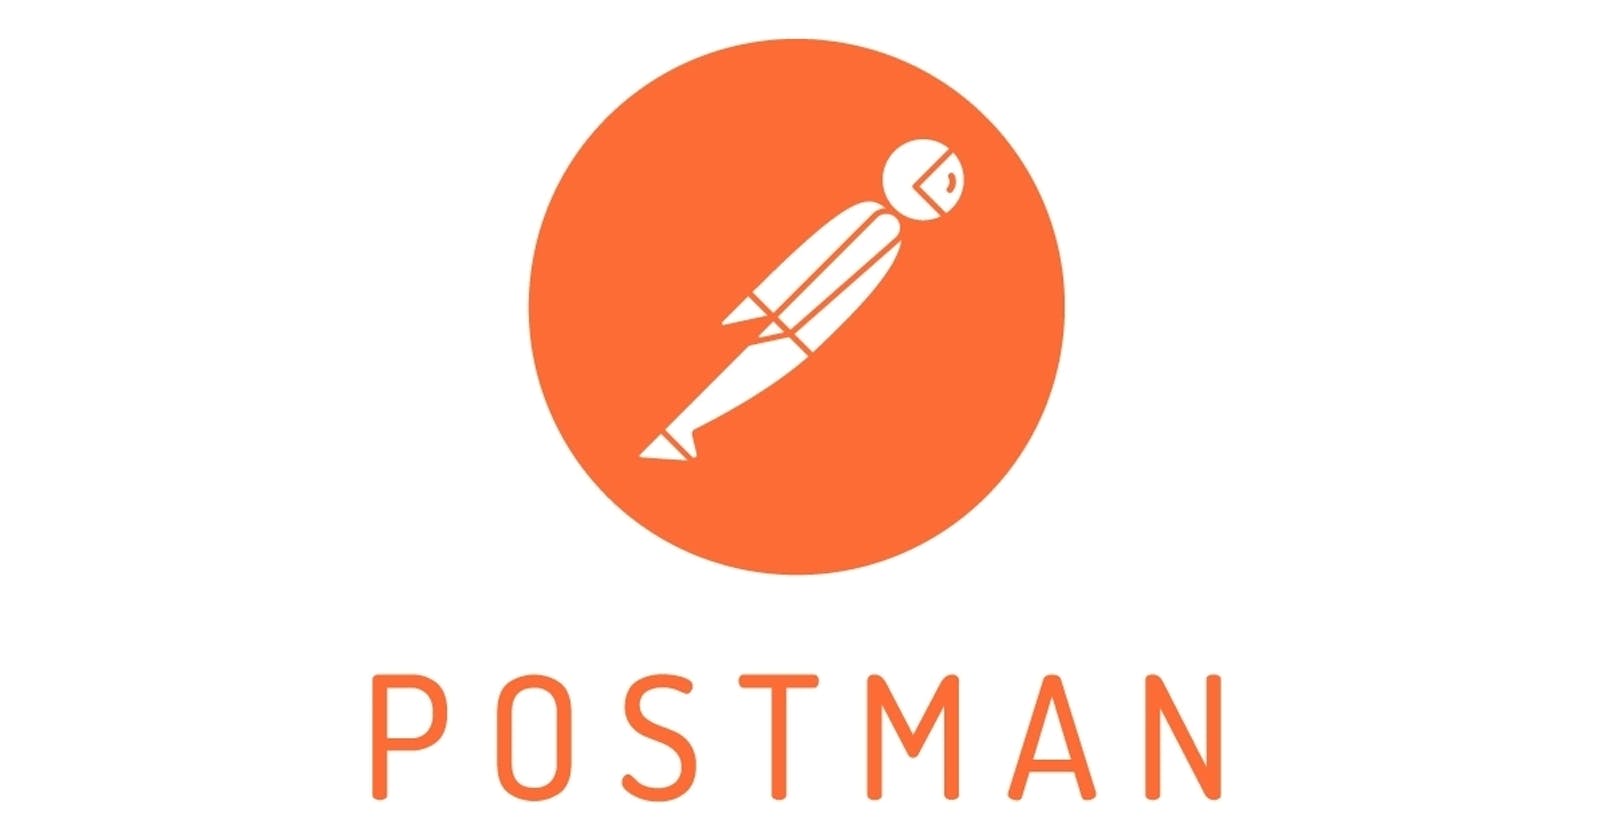 Part 2: Testing the Paystack Integration Using Postman